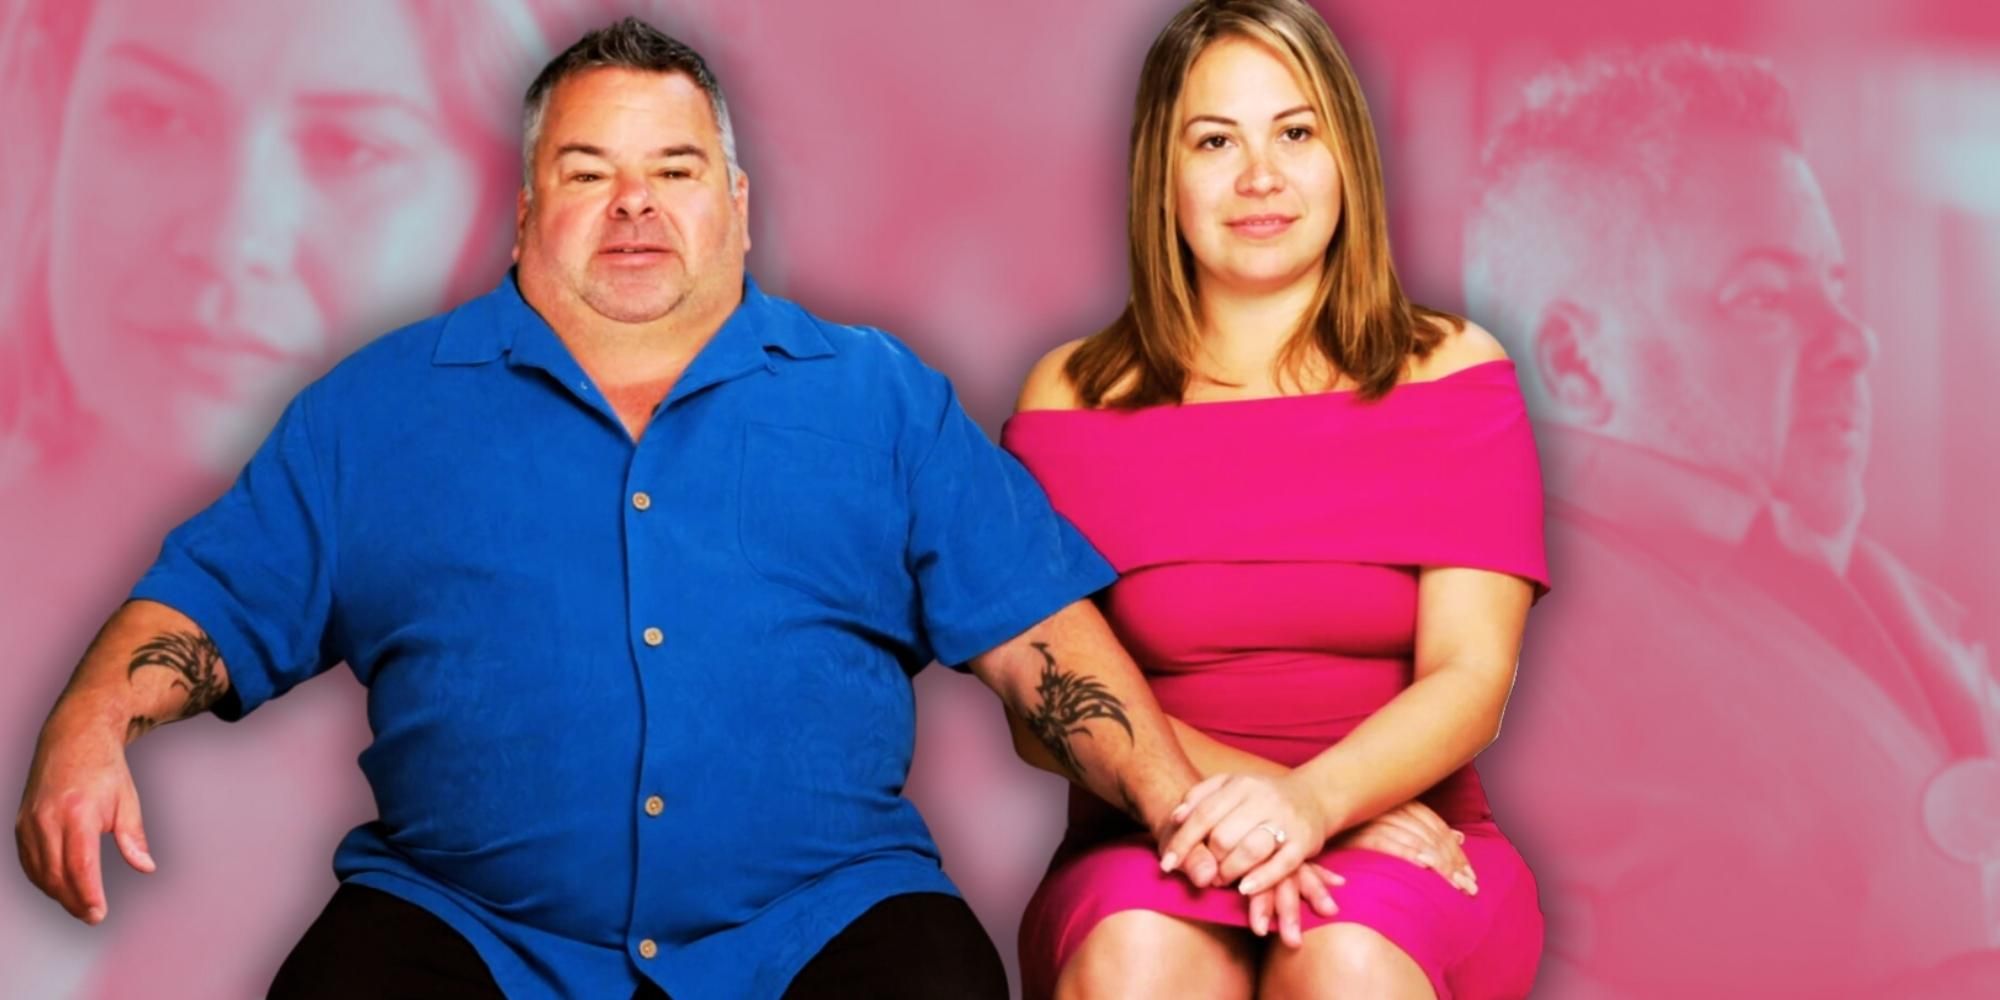 Big Ed and Liz Woods from 90 Day Fiancé sit next to each other, holding hands.